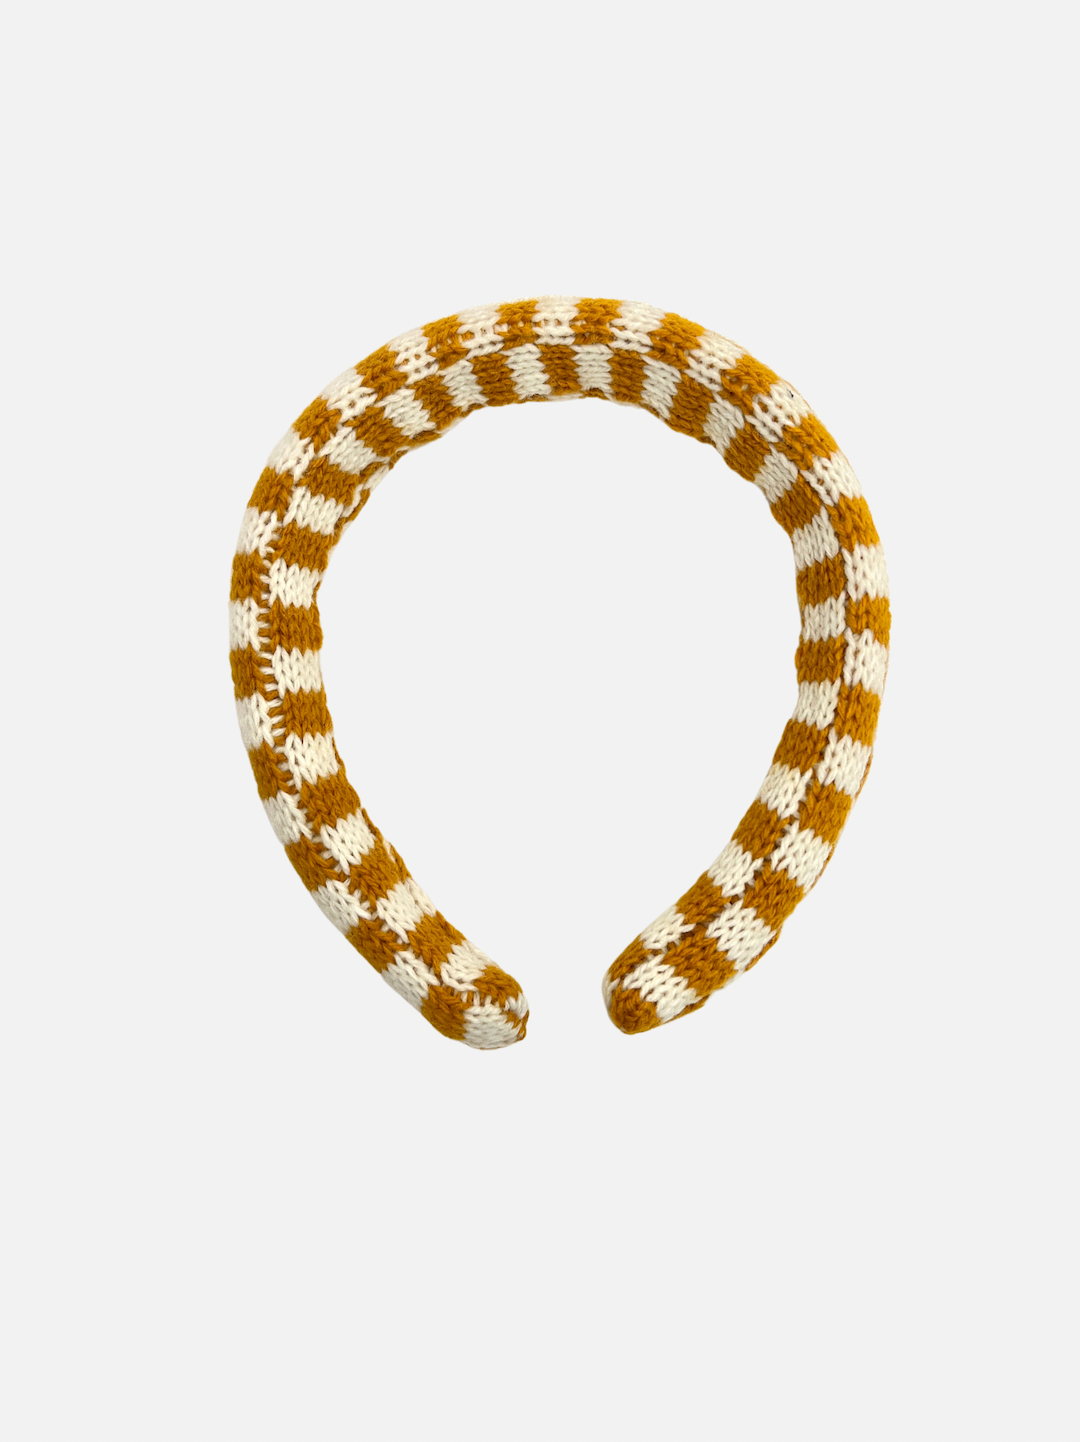 A kids' knitted headband in an ochre and cream check